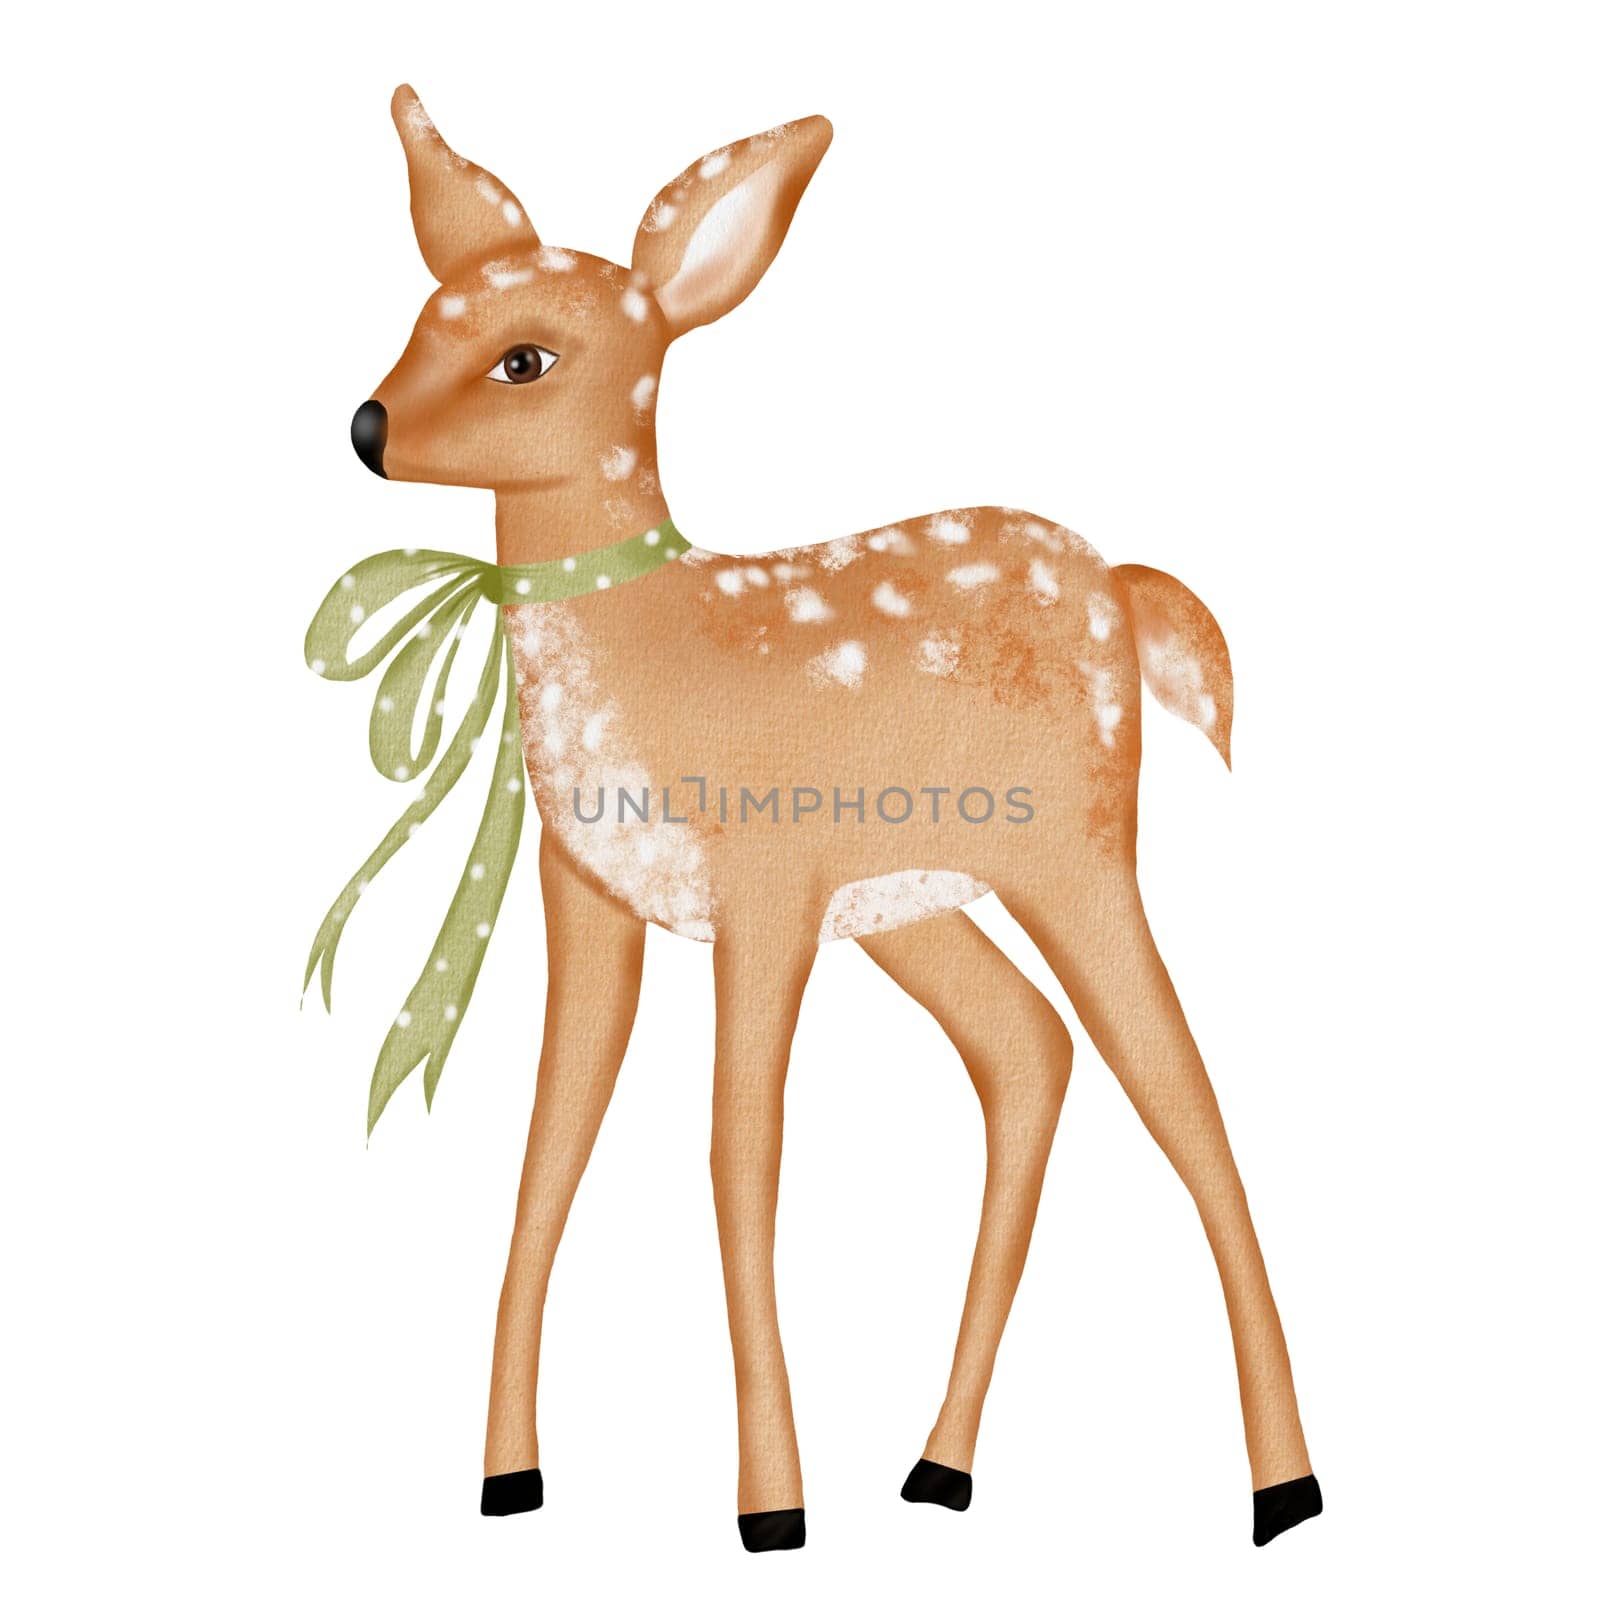 Watercolor drawing of a cute fawn with a green bow isolate on a white background. Pretty deer for printing on educational children's cards and posters.